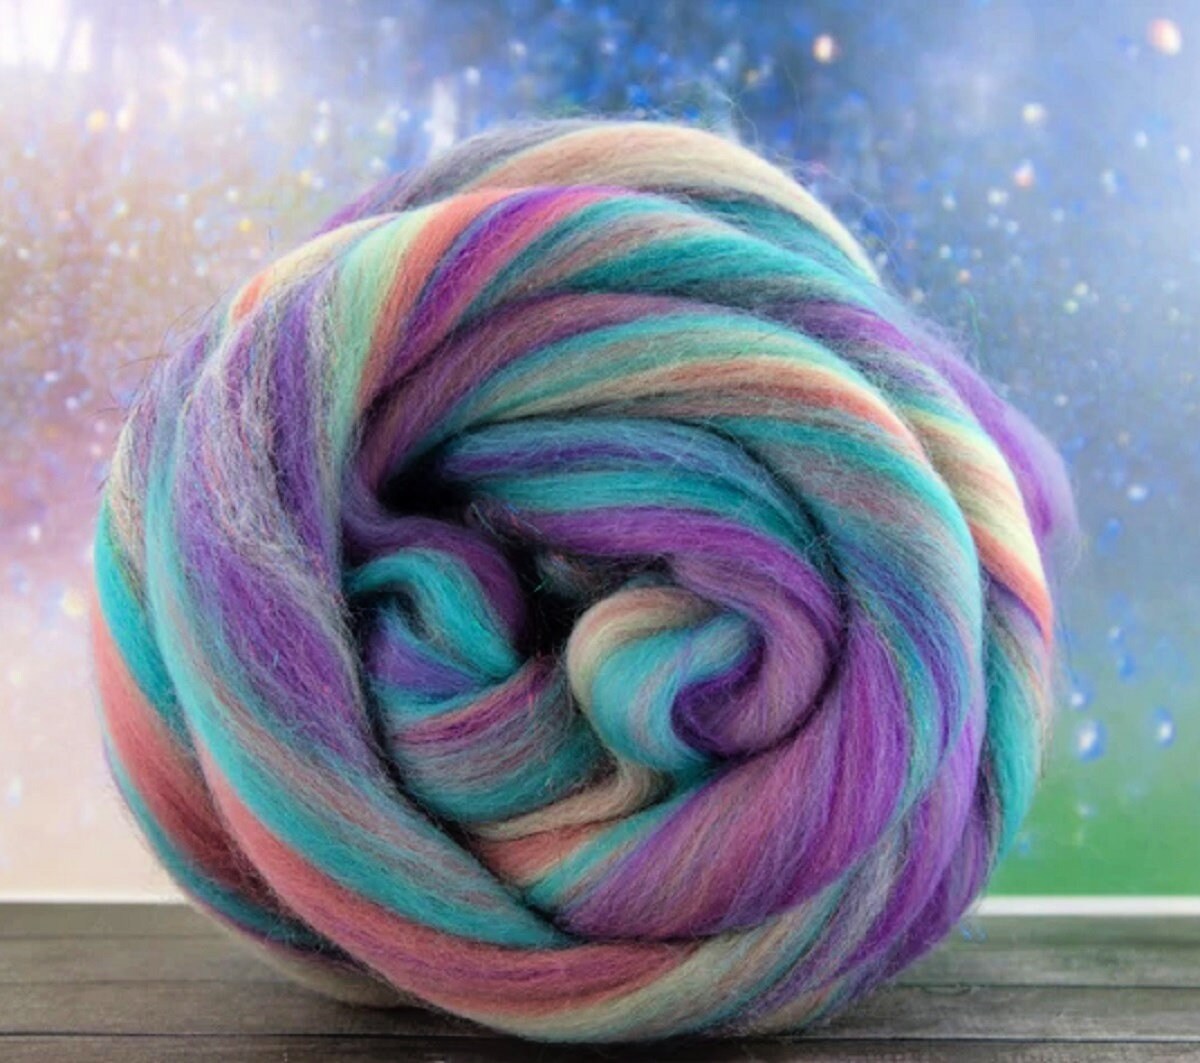 New 2 Ozs Once Upon A Time Wool Blended Merino & Glitter Roving, Felting Spinning, Weaving, Supplies, "